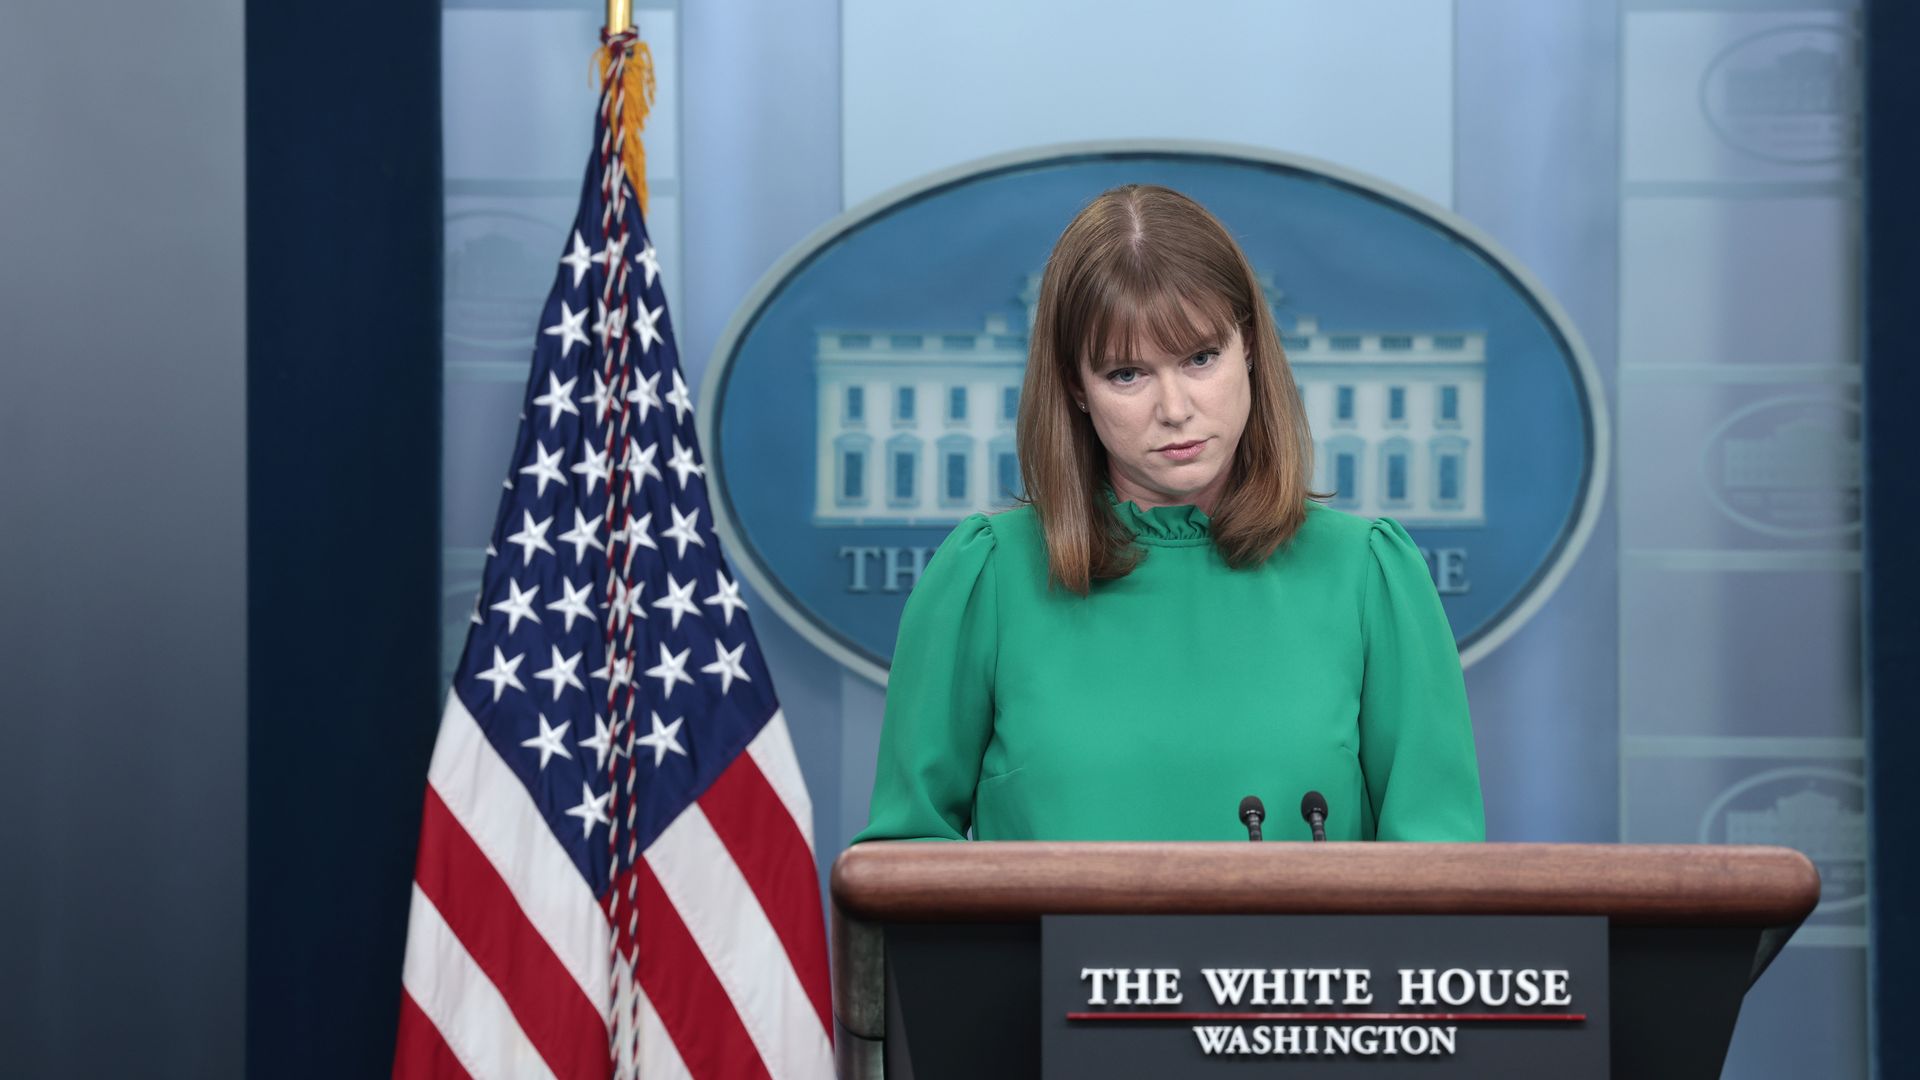 White House Communications Director Kate Bedingfield is shown conducting the daily press briefing.